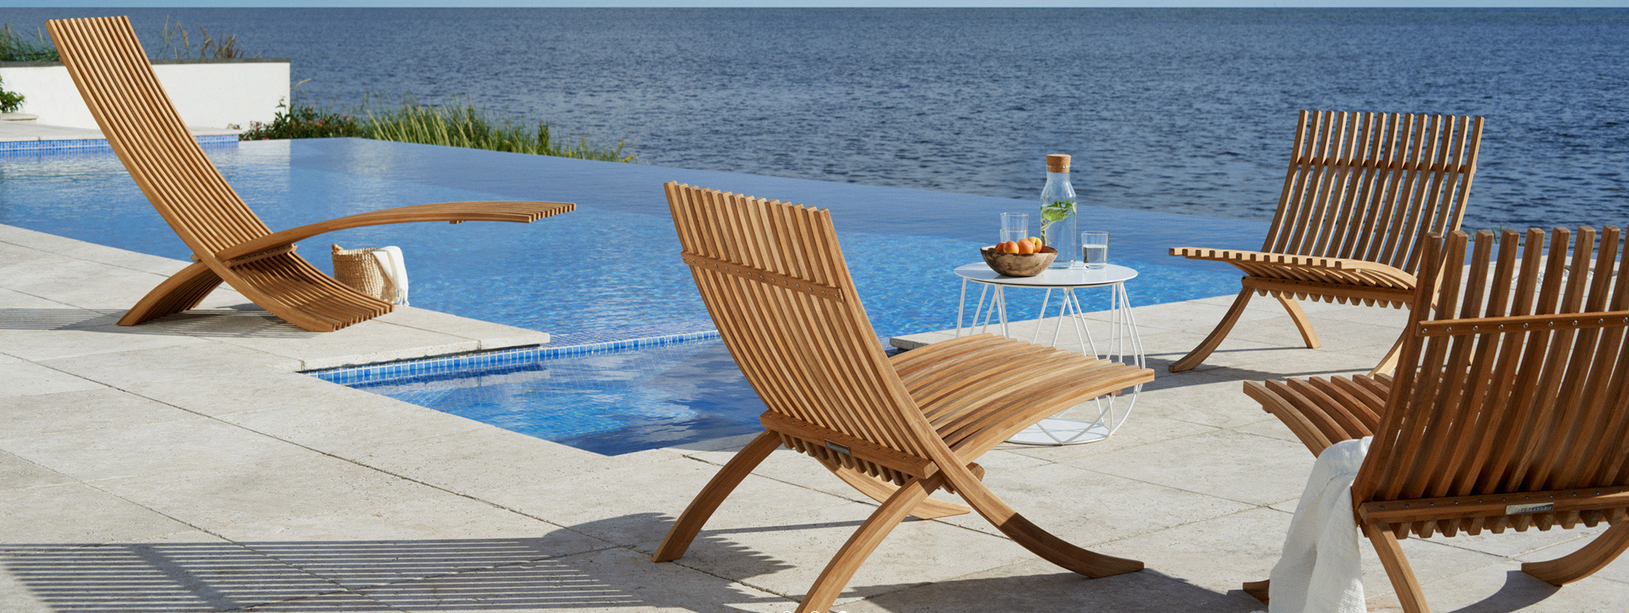 Nozib Lounger (left) and Lounge Chairs (right) 